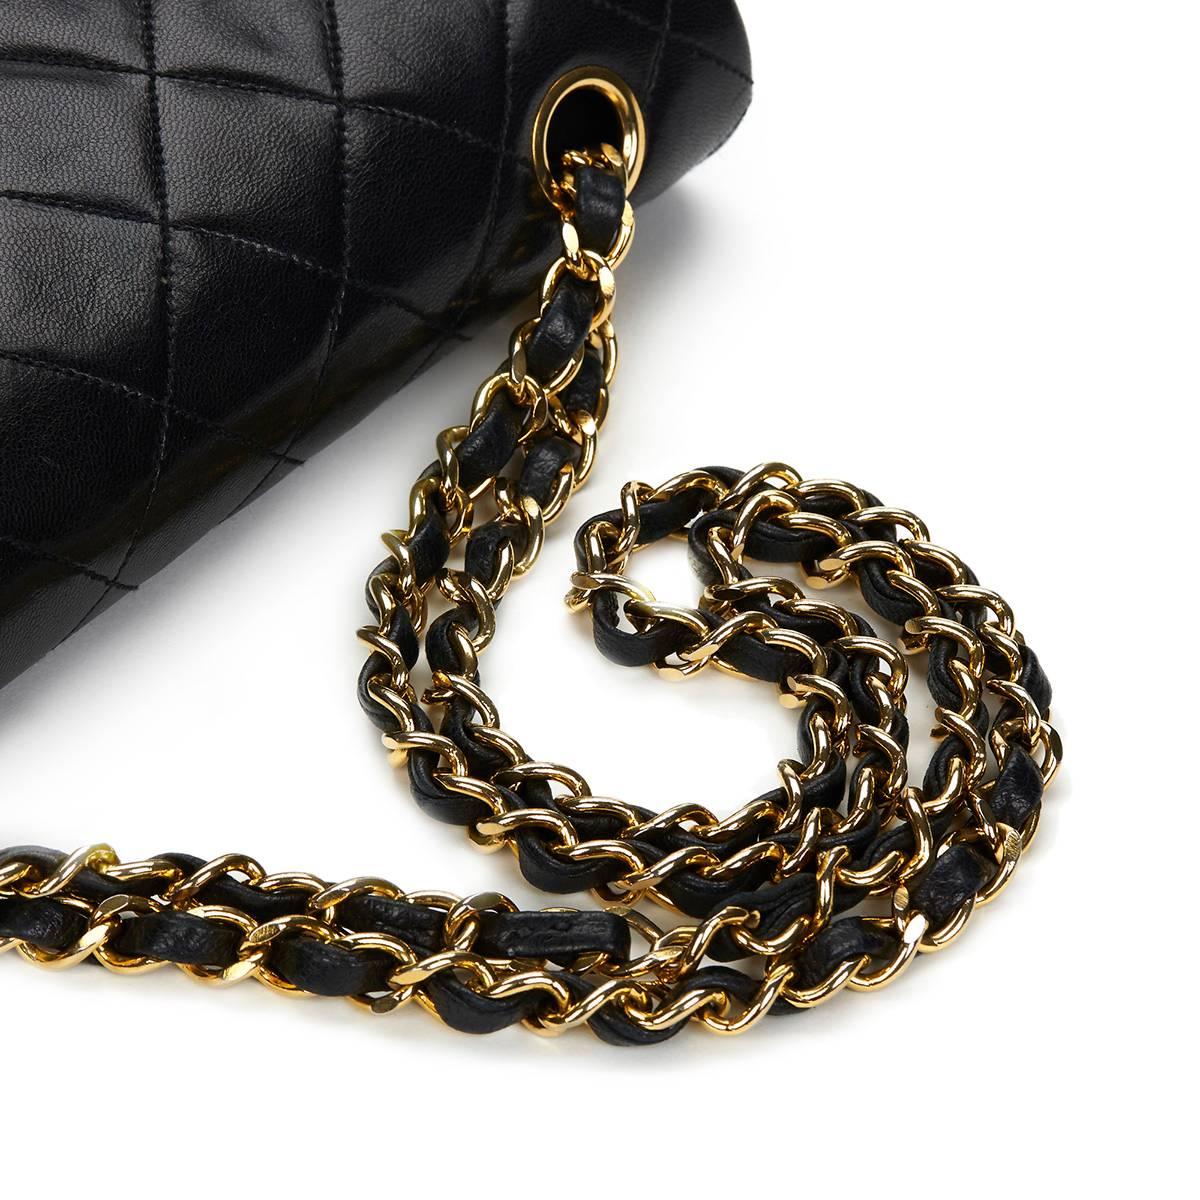 Chanel Black Quilted Lambskin Vintage Small Classic Double Flap Bag 1980s  1